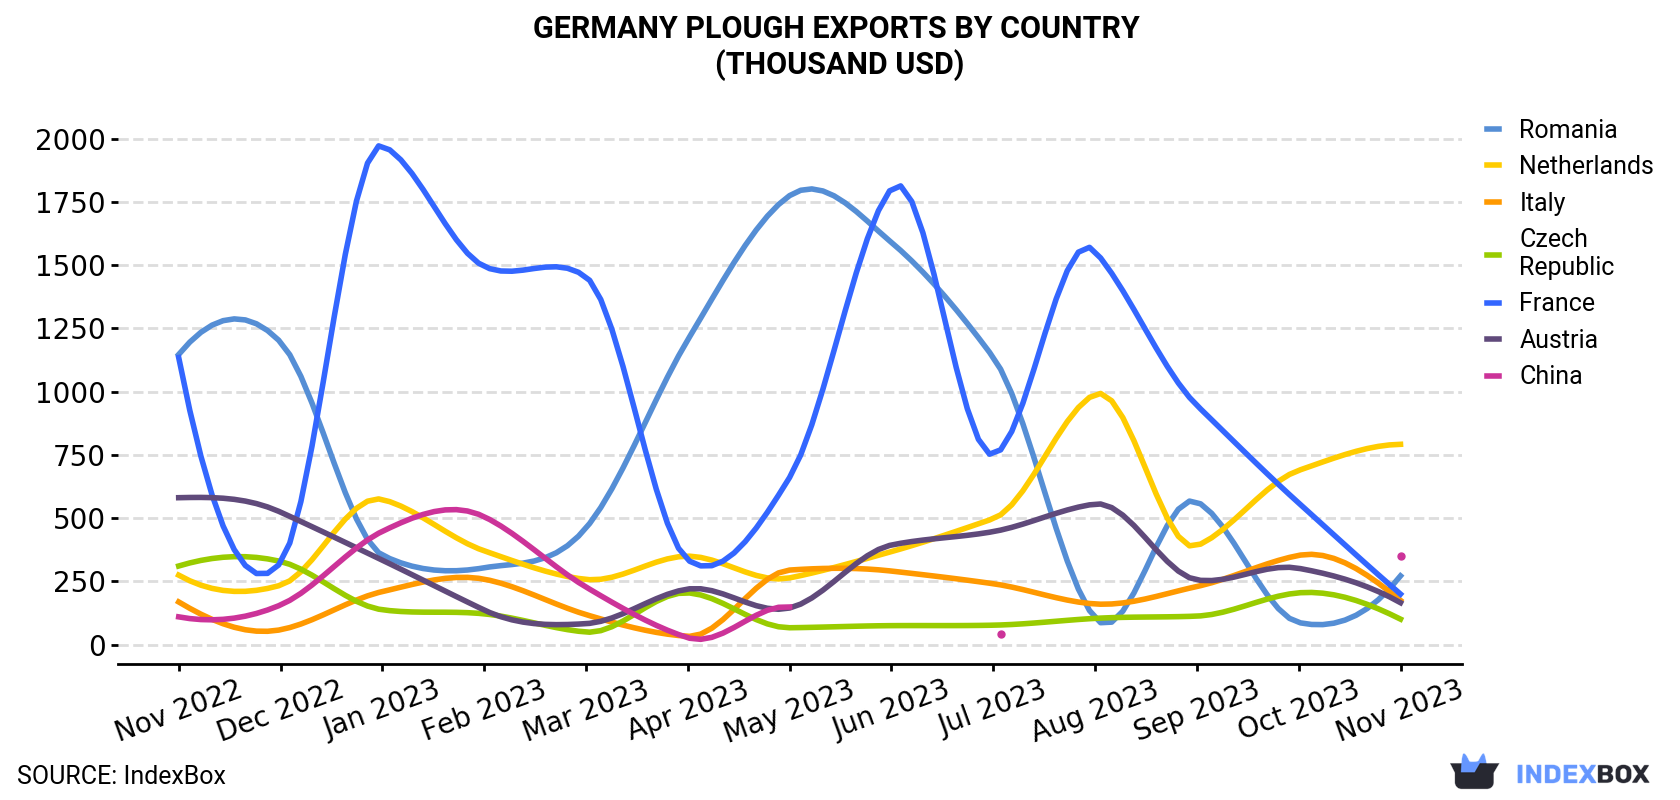 Germany Plough Exports By Country (Thousand USD)